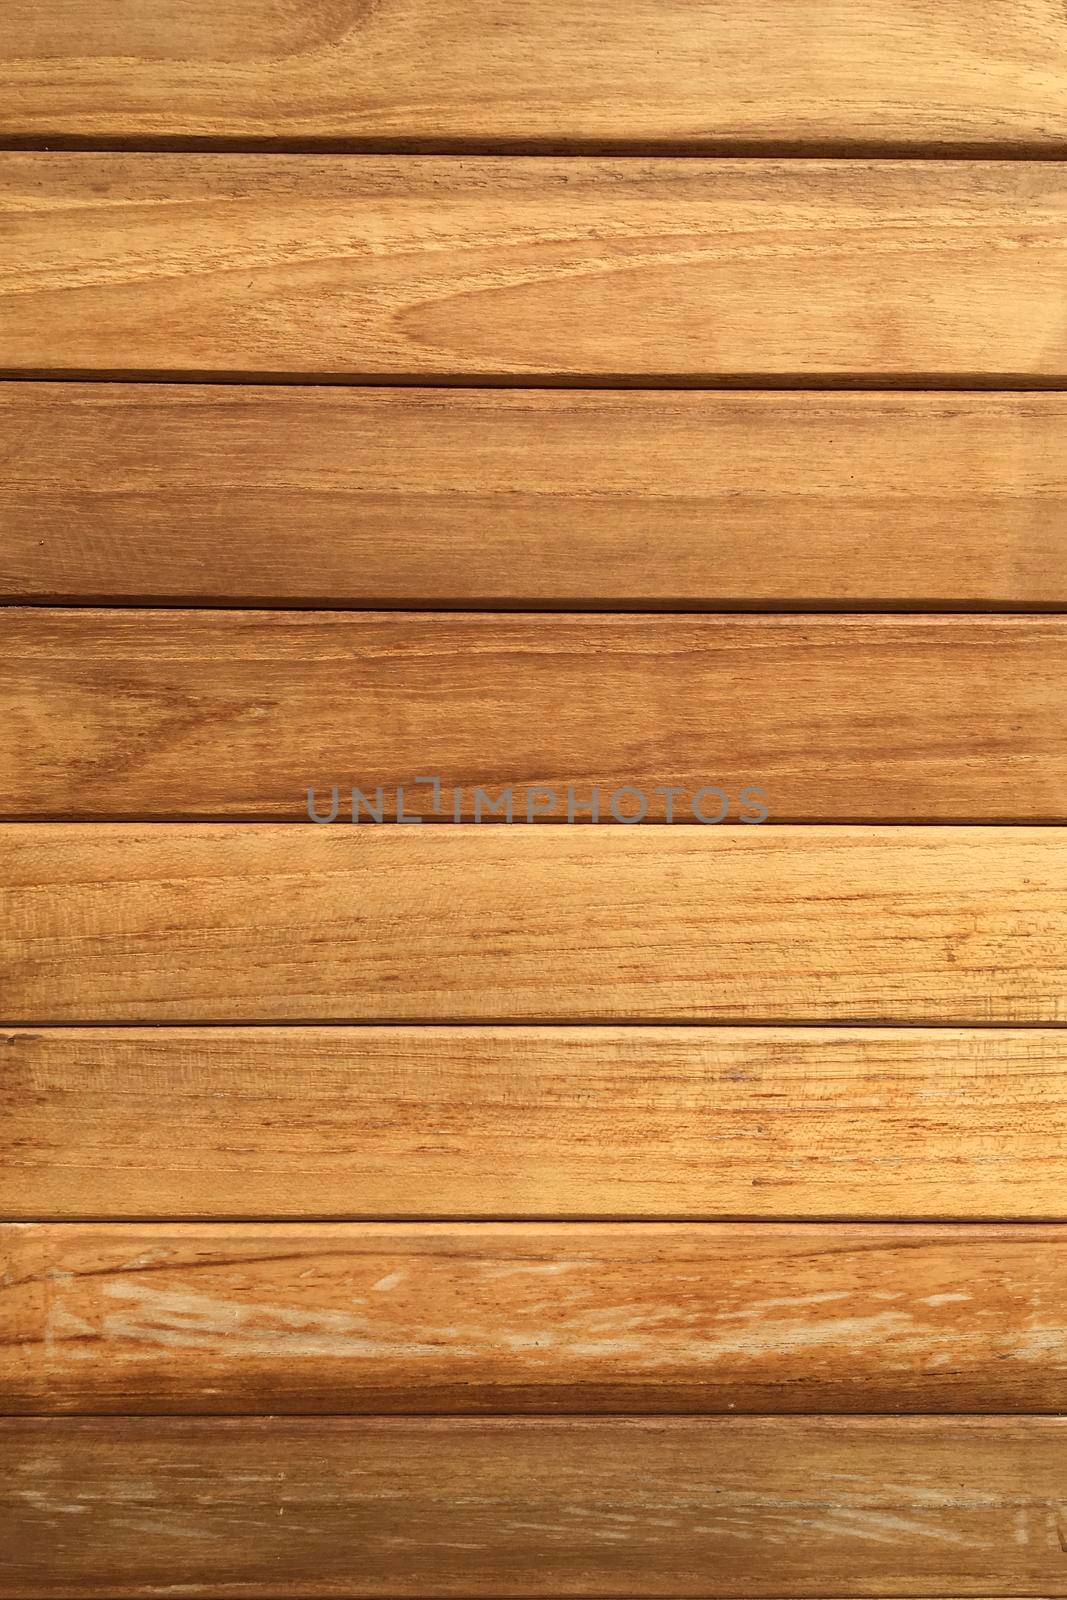 Timber red  brown wood plank panel texture with natural striped pattern background